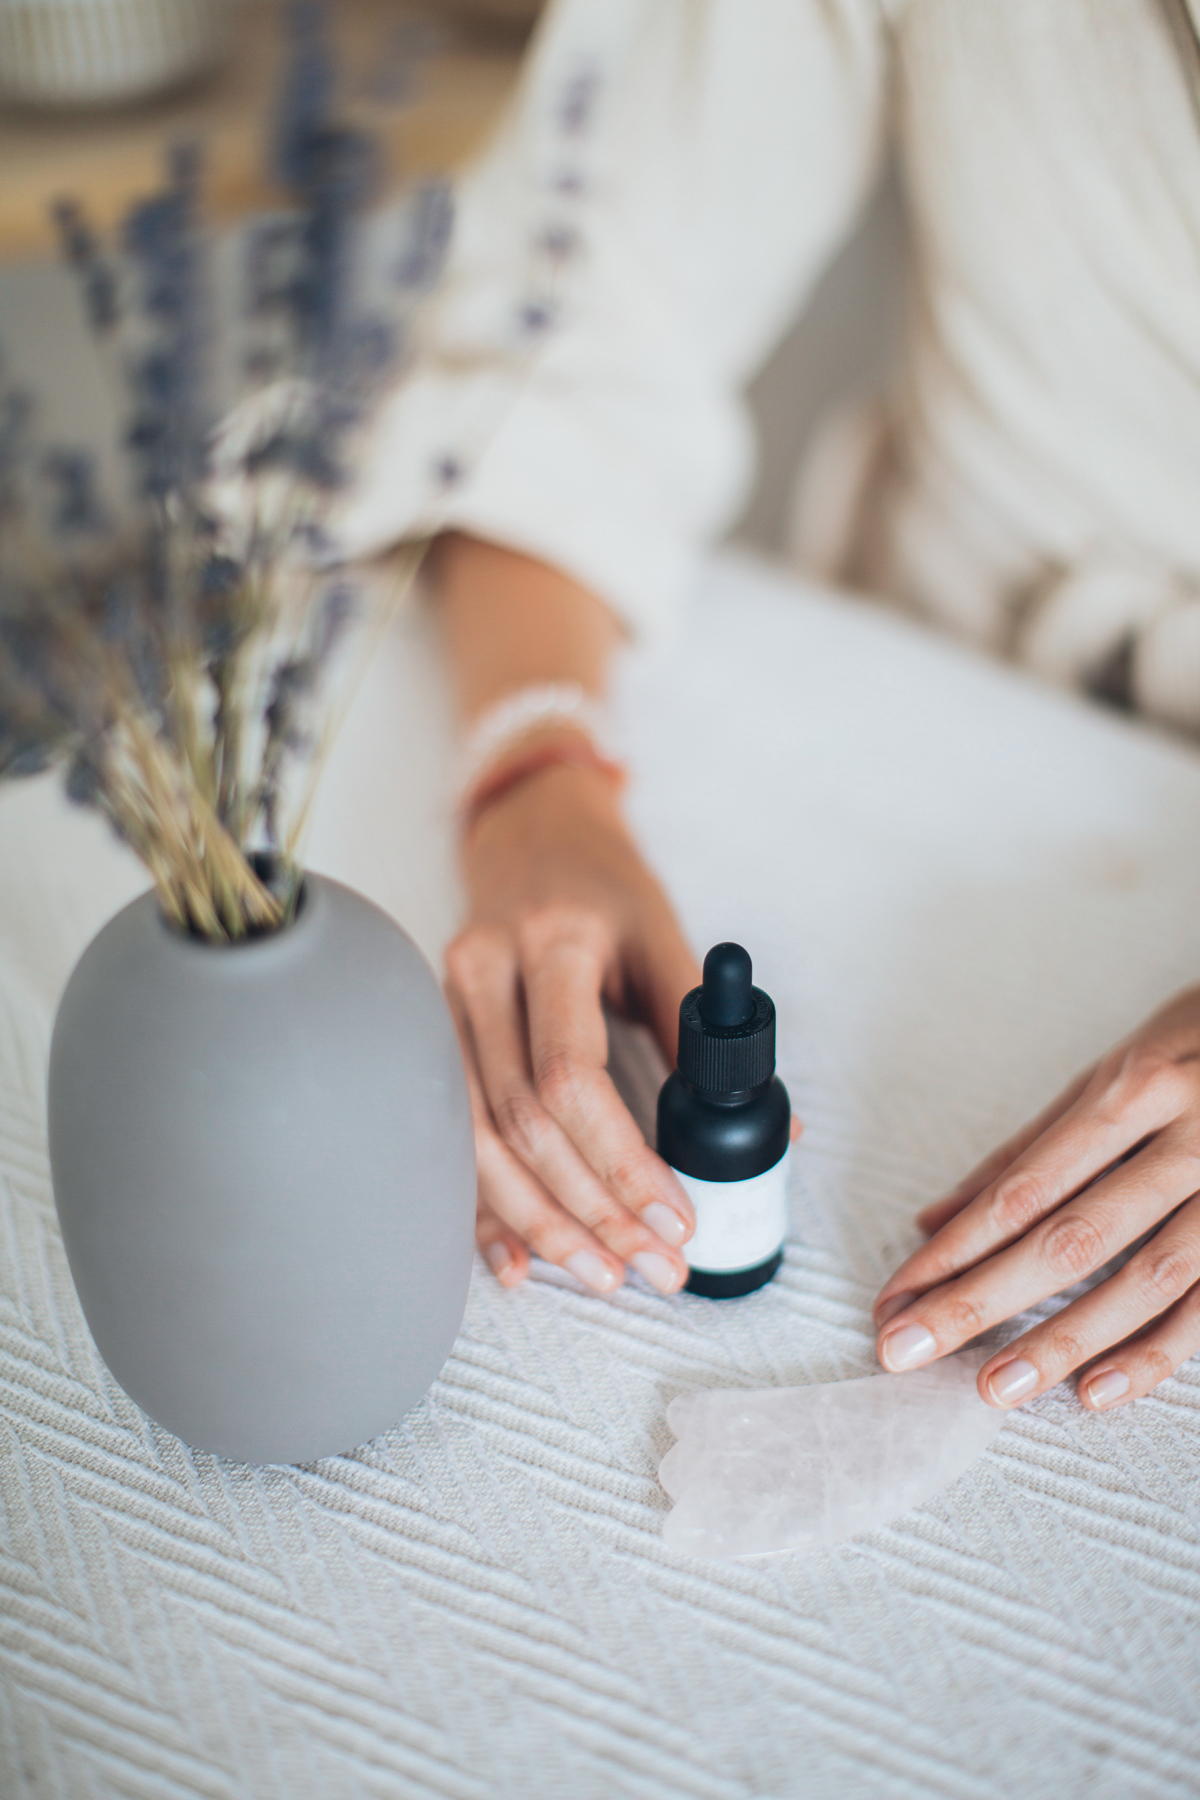 Breast Massage – Essential Oils to Use